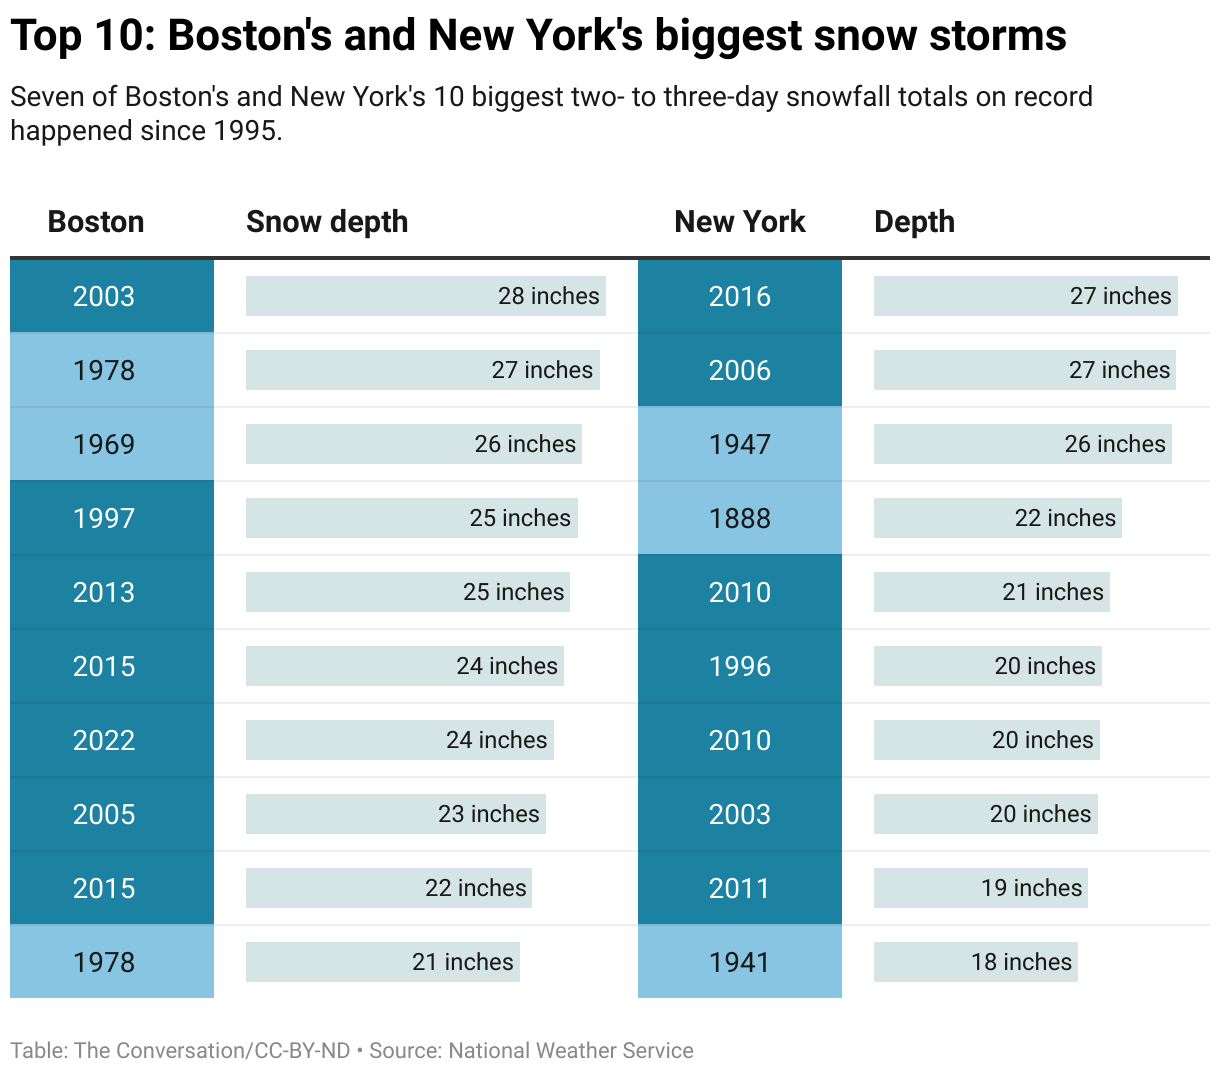 Boston's and New York's biggest snow storms.